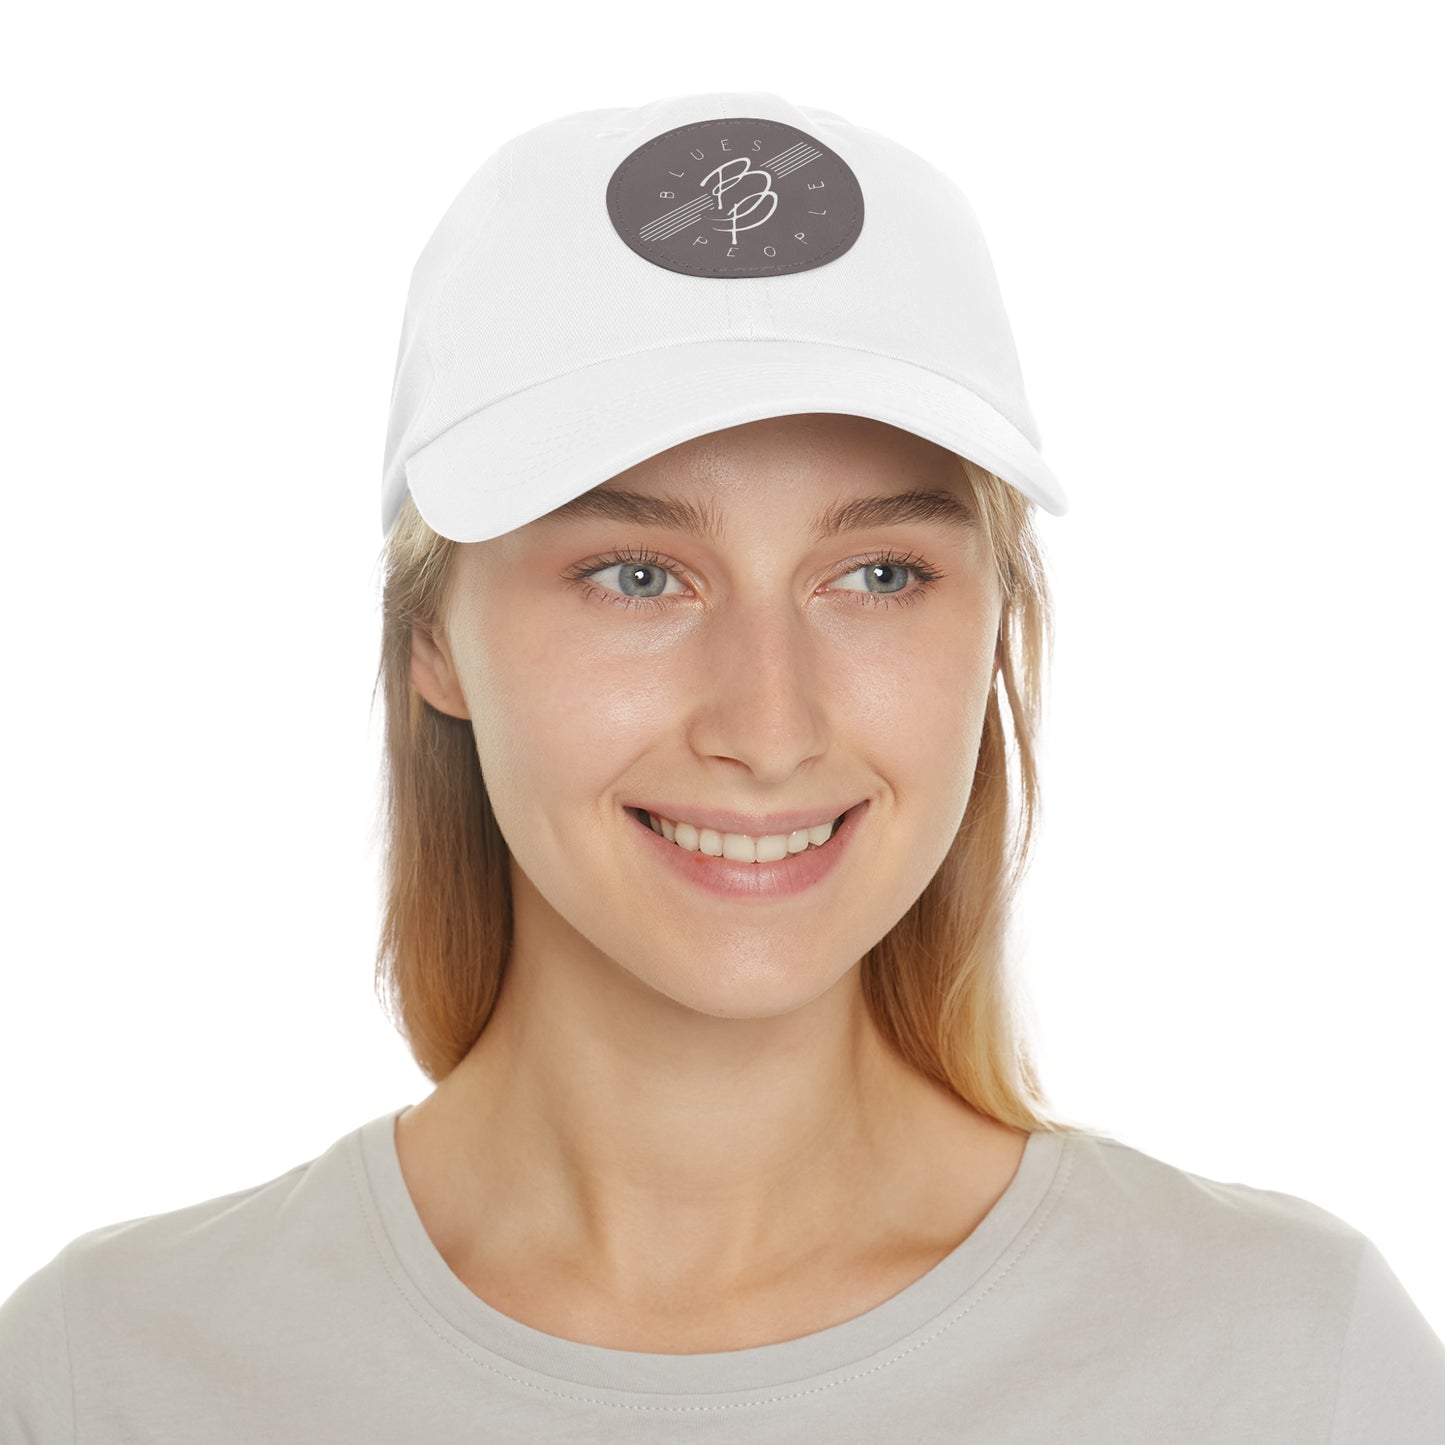 Low Profile Hat with Leather Patch (Round) - White Logo